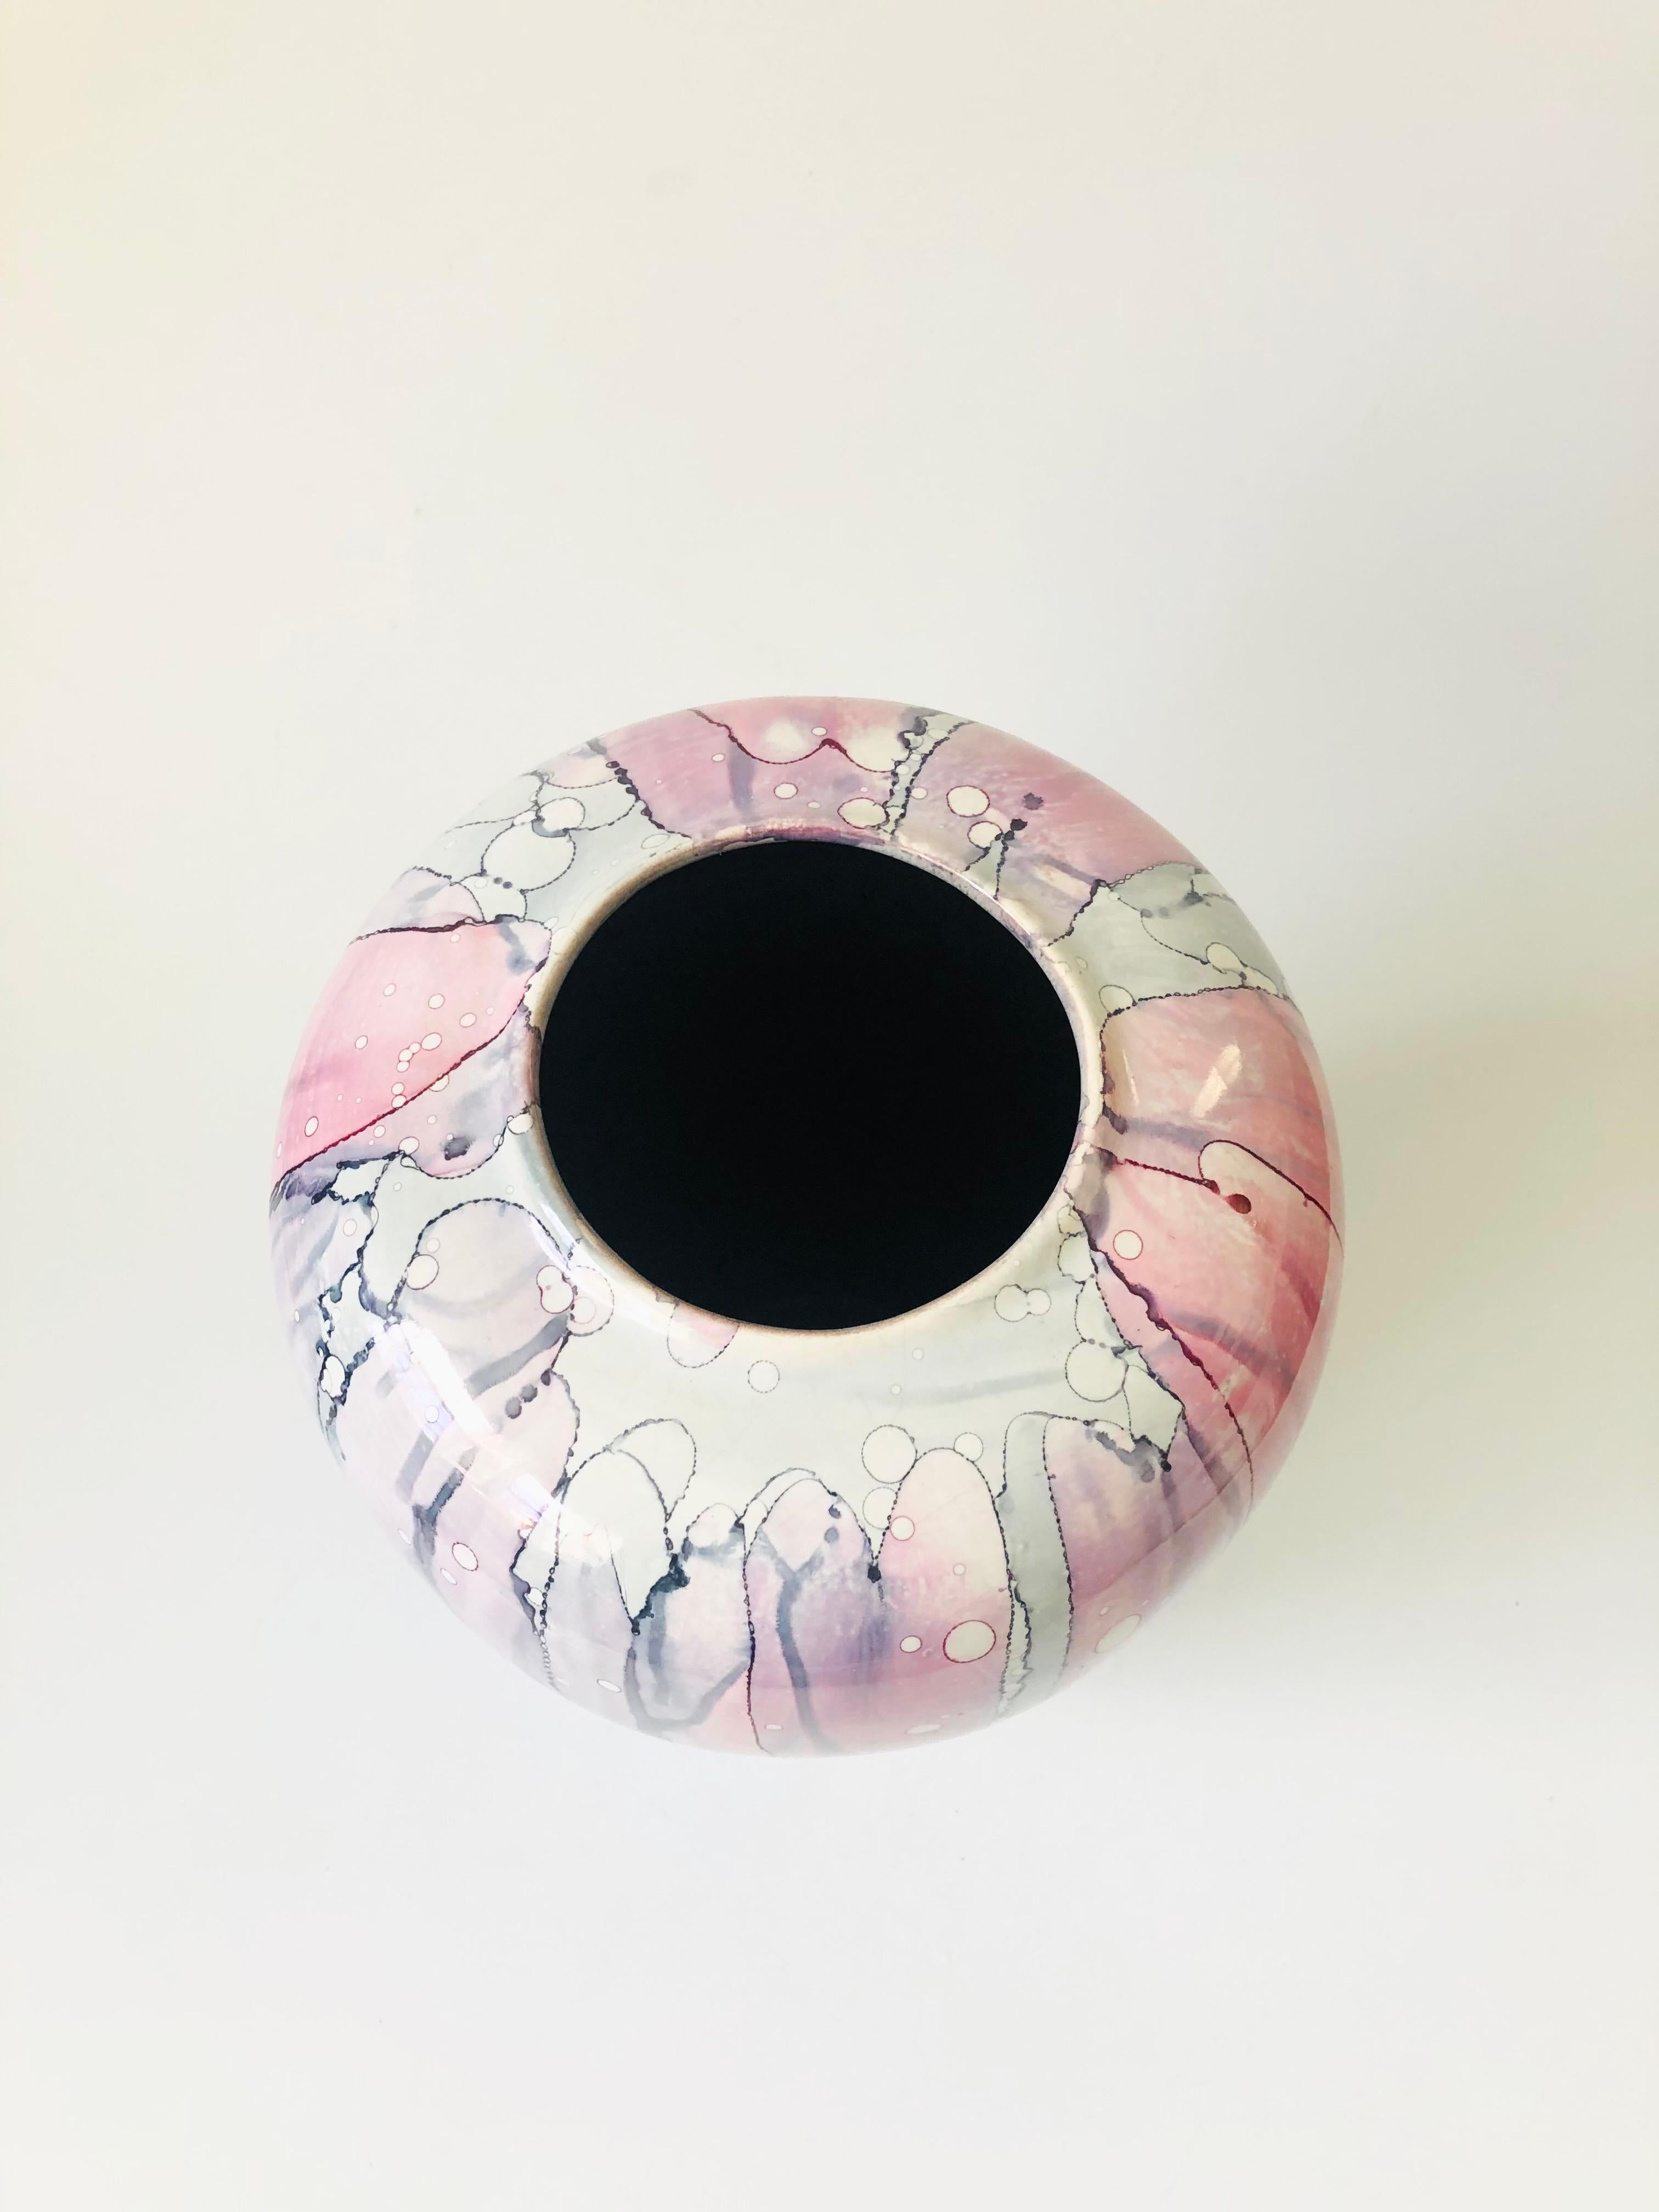 A wonderful vintage handmade pottery vase with a unique drip glaze in purple and pink. Nice size to make a statement.

